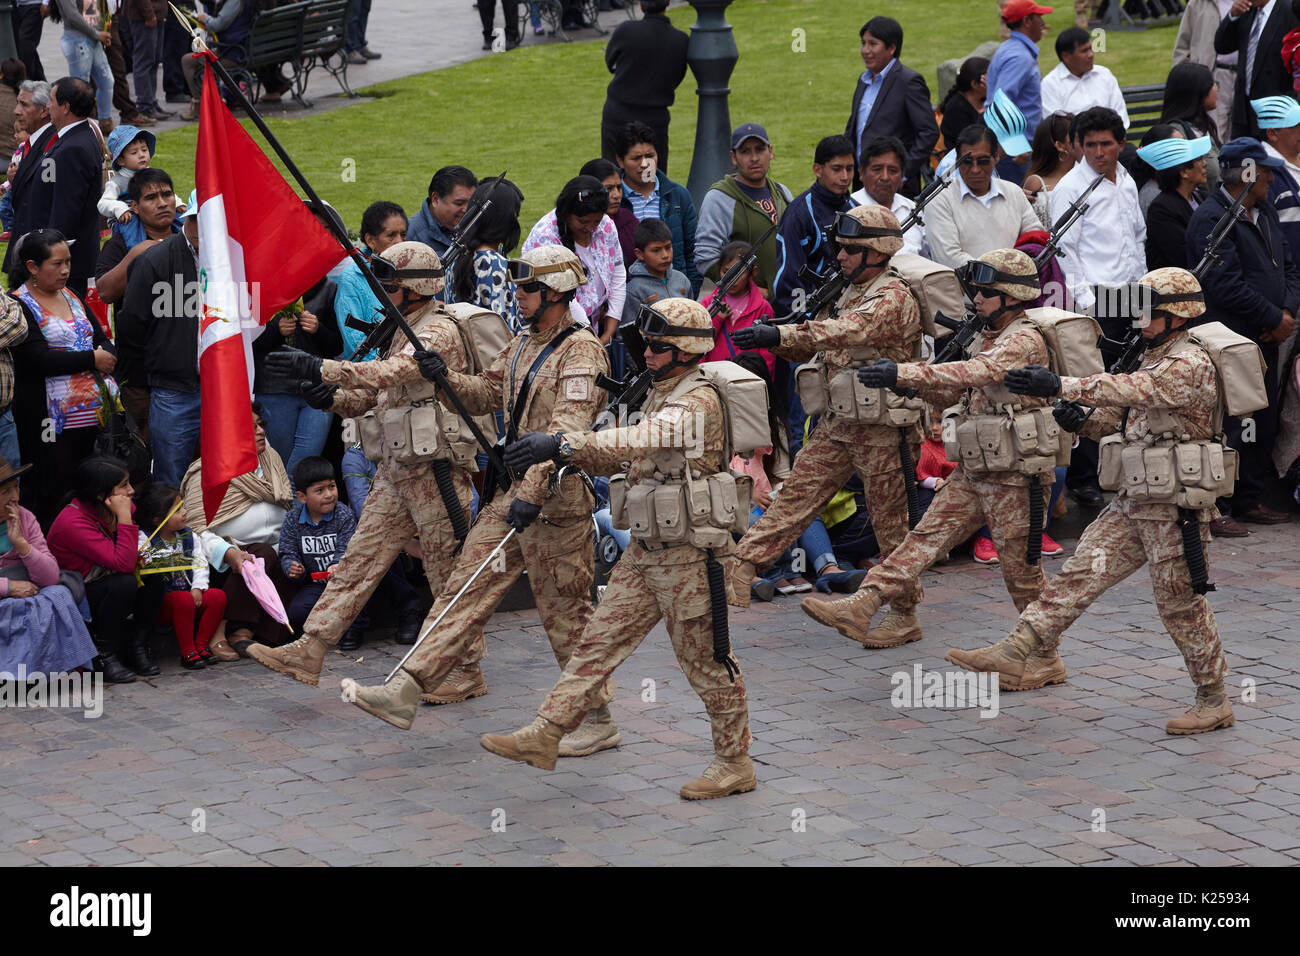 Camouflaged soldiers at parade, Plaza de Armas, Cusco, Peru, South America Stock Photo